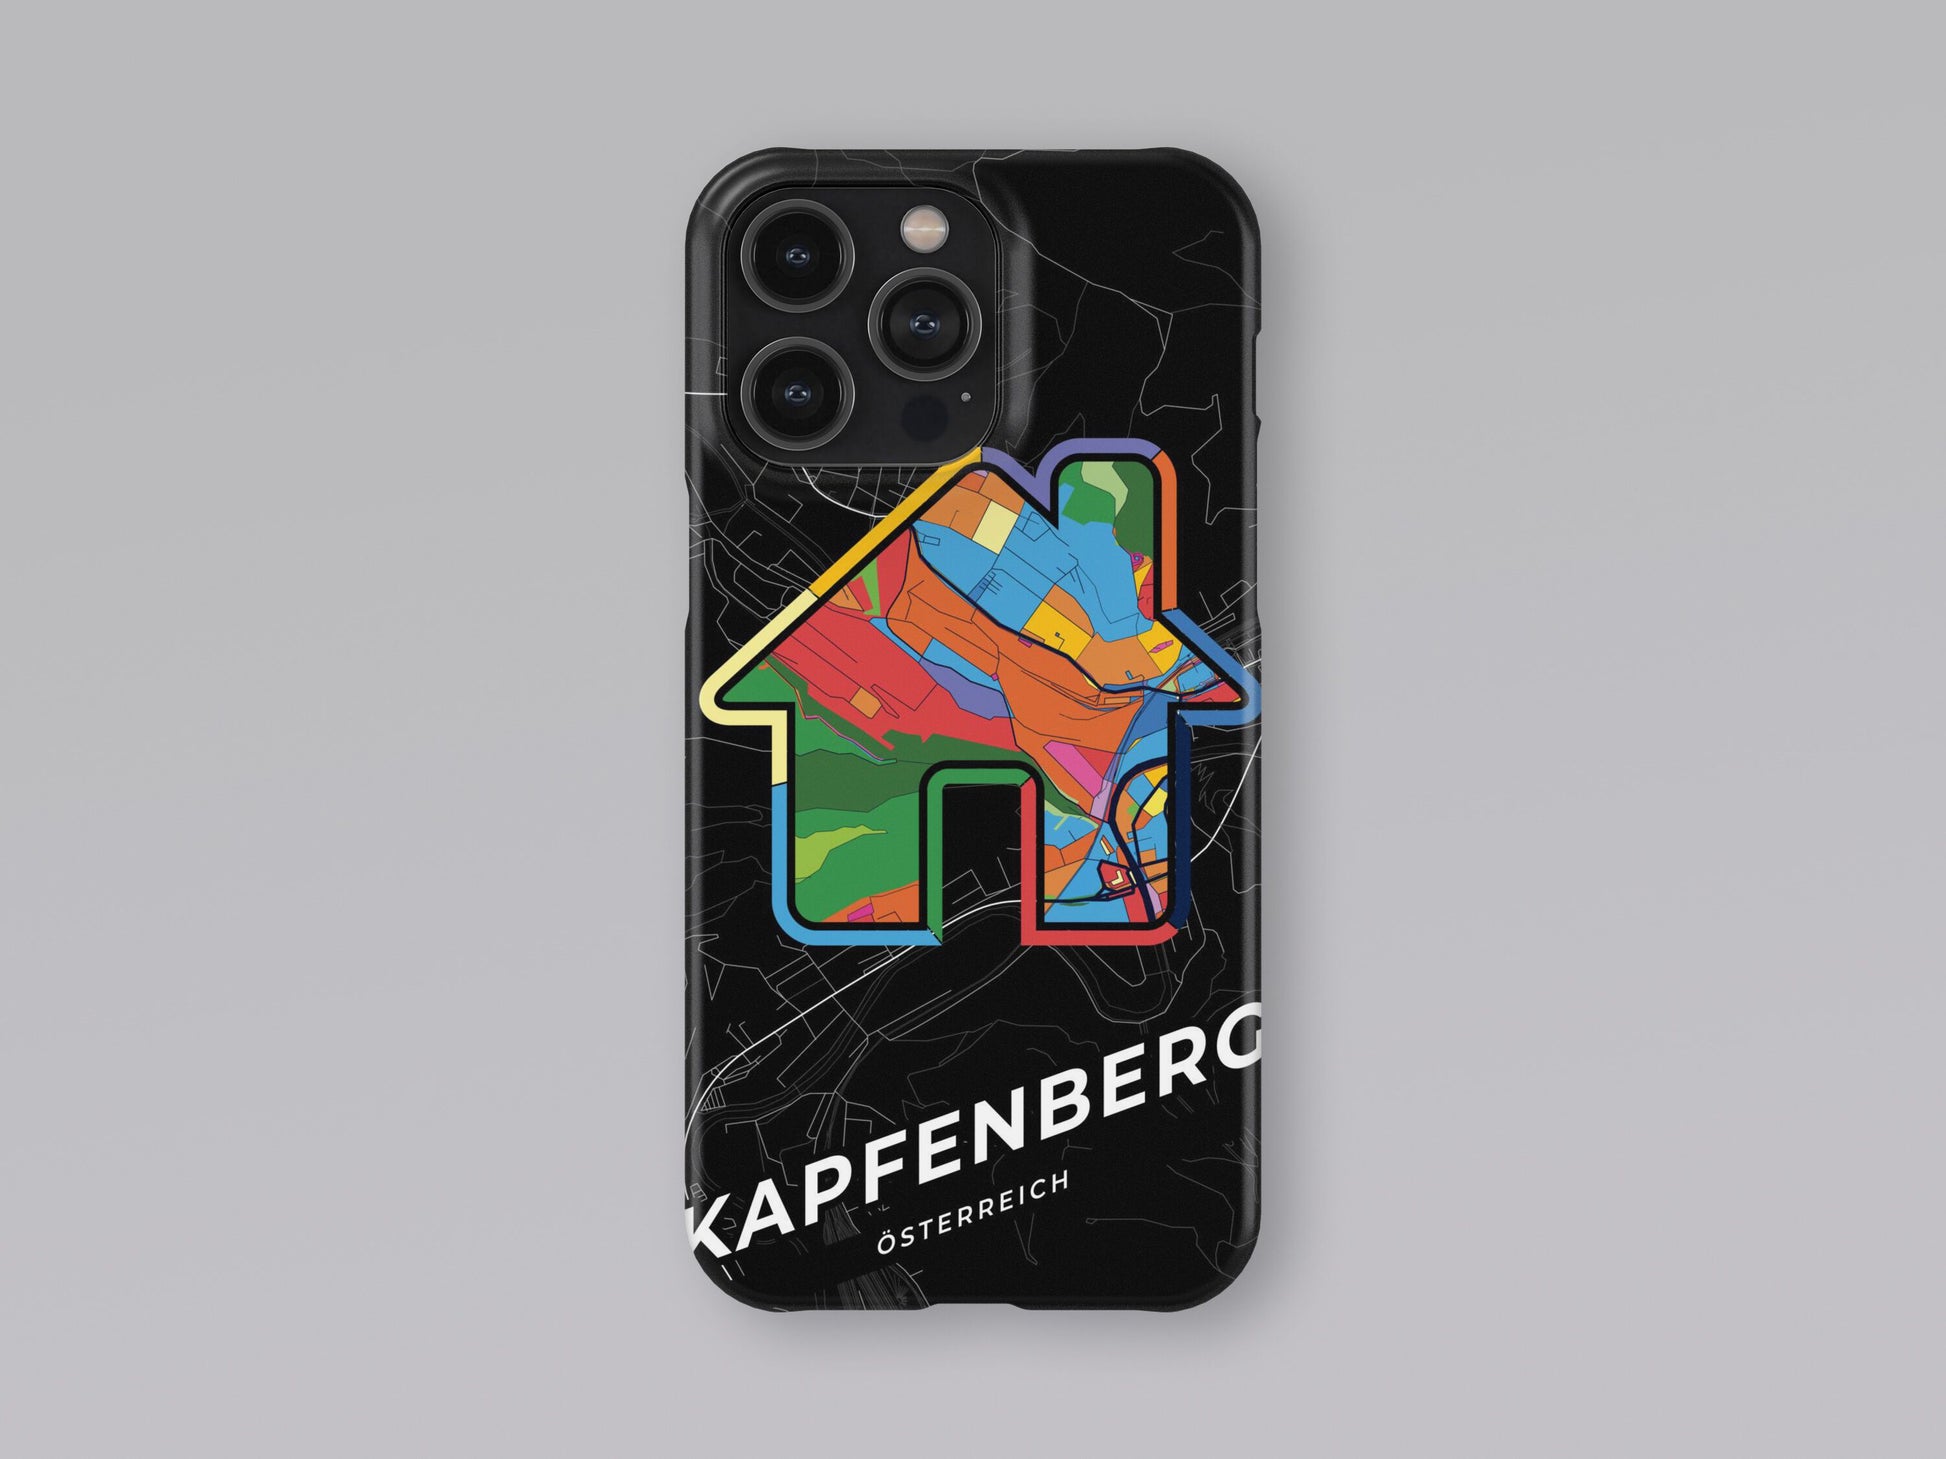 Kapfenberg Österreich slim phone case with colorful icon. Birthday, wedding or housewarming gift. Couple match cases. 3